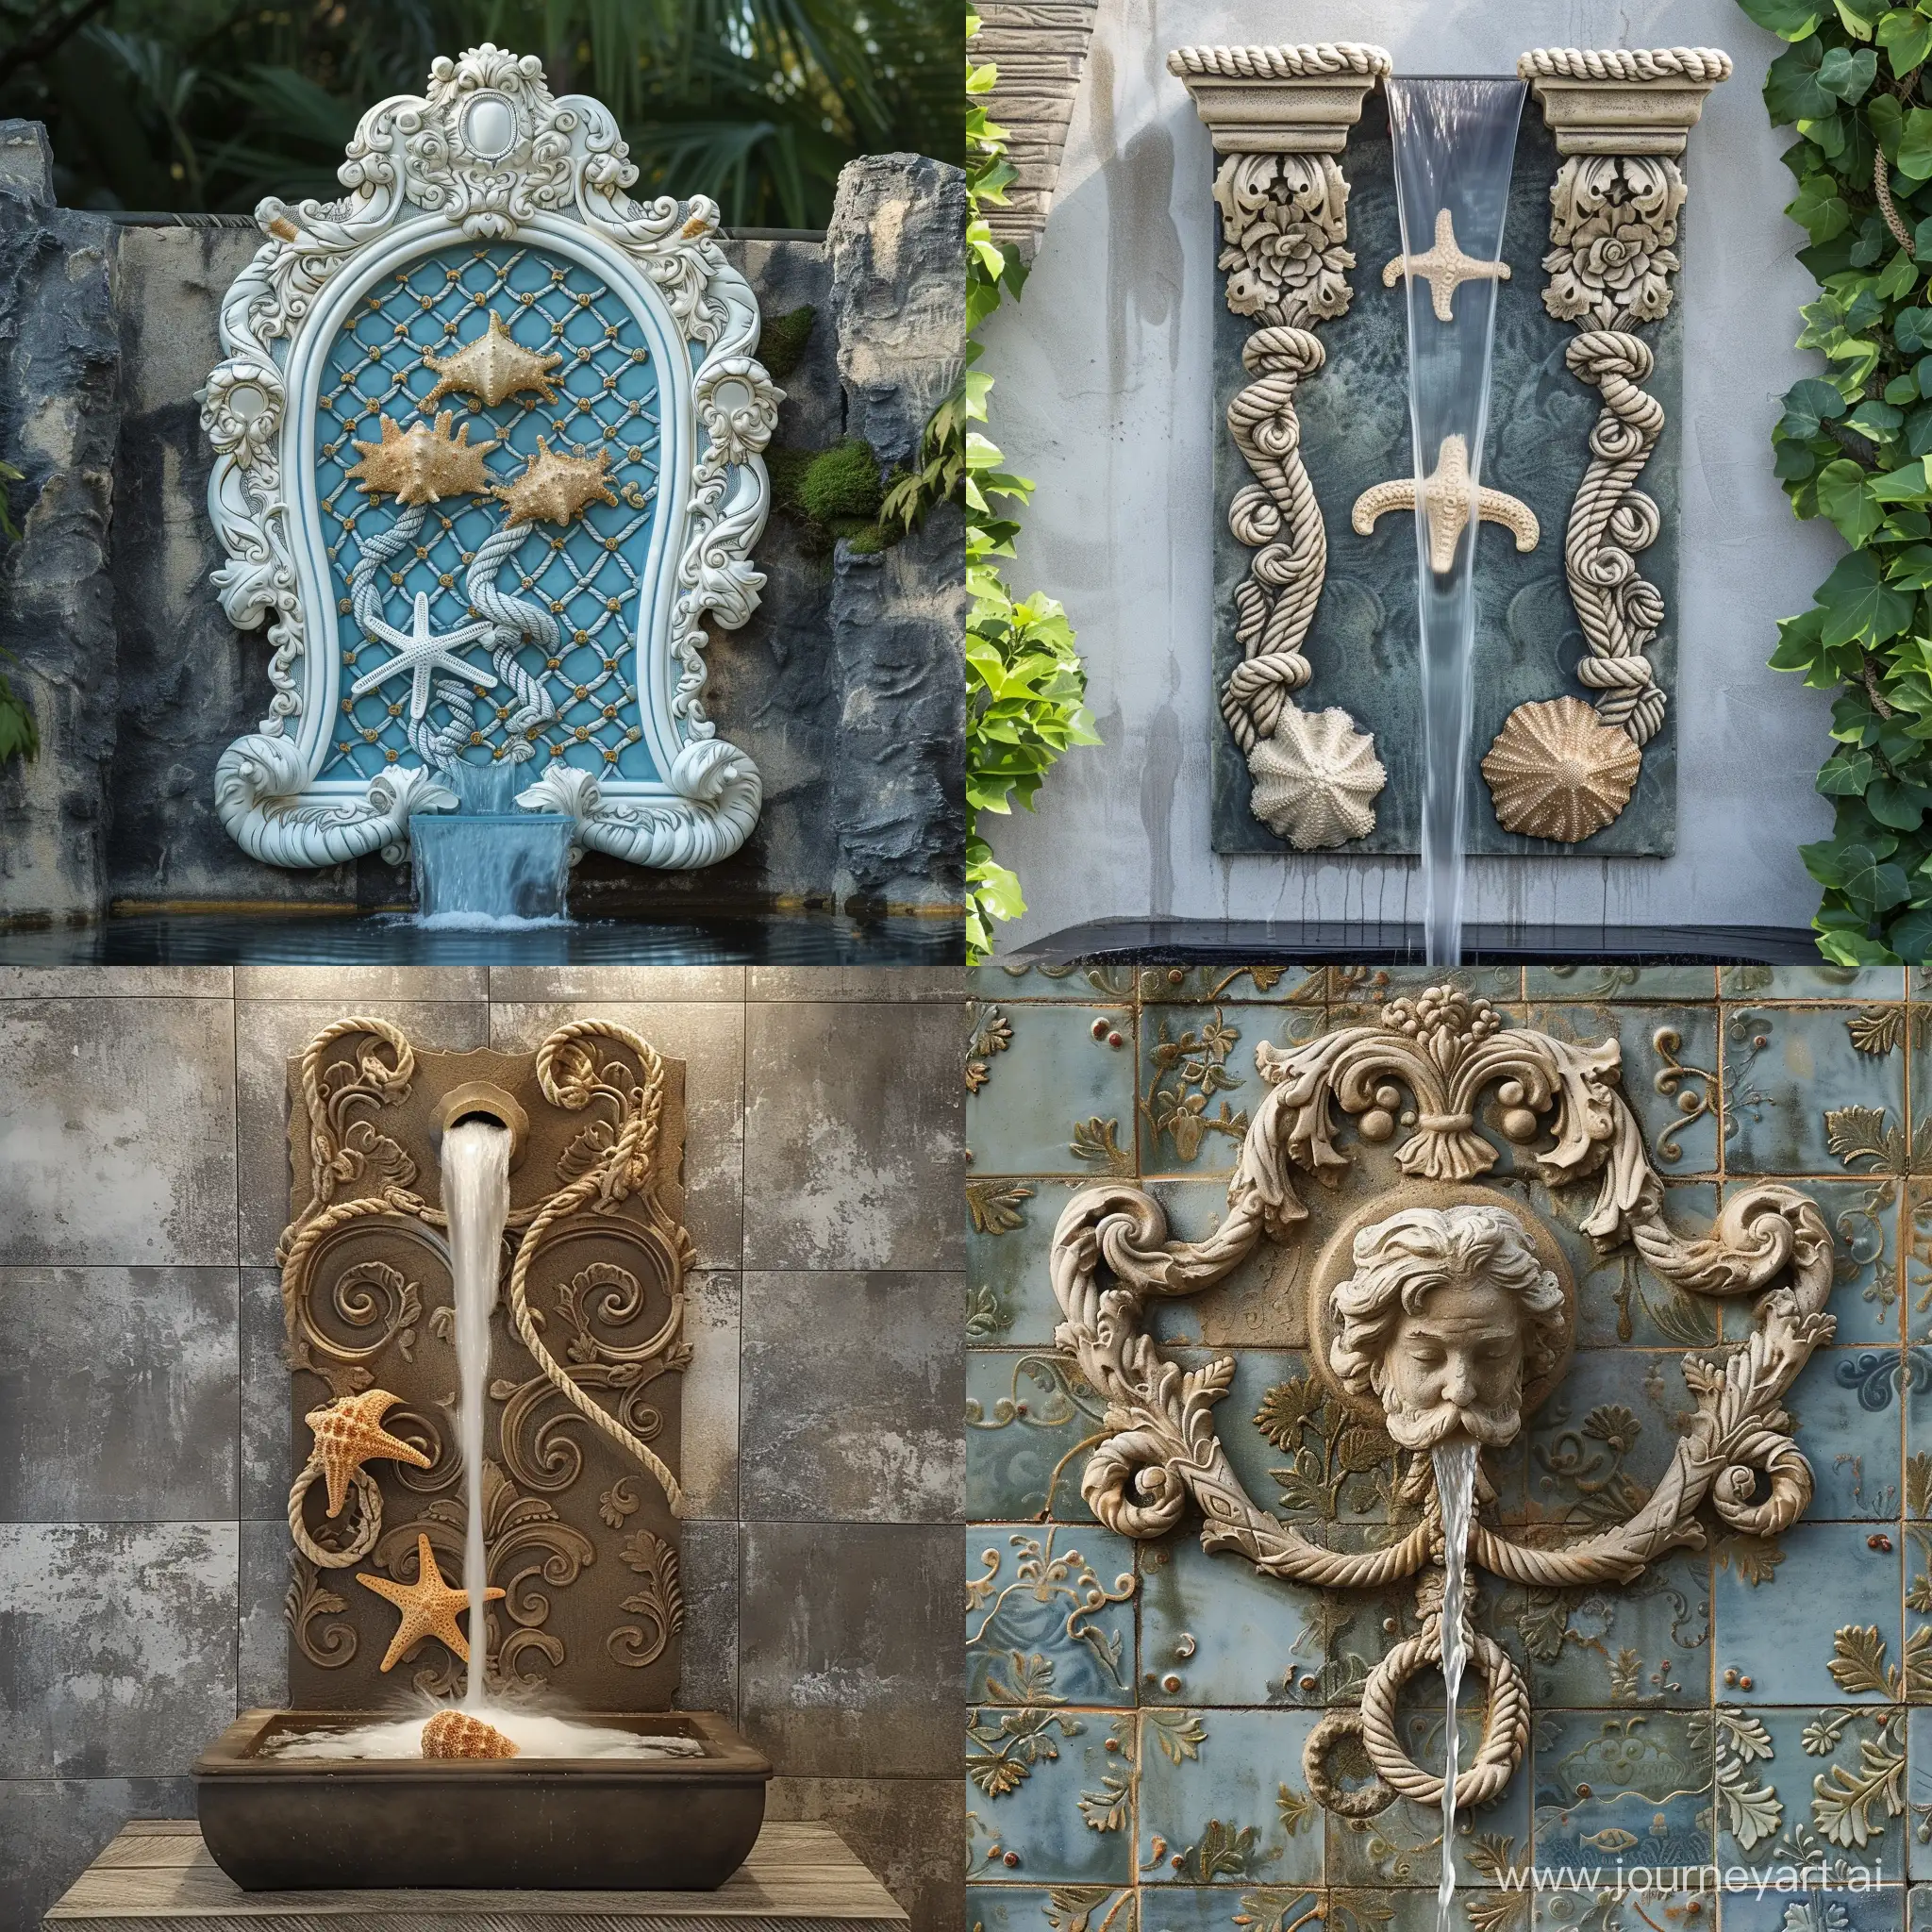 Intricate-Baroque-Patterned-Wall-Fountain-with-Rope-Accents-in-a-SeaThemed-Setting